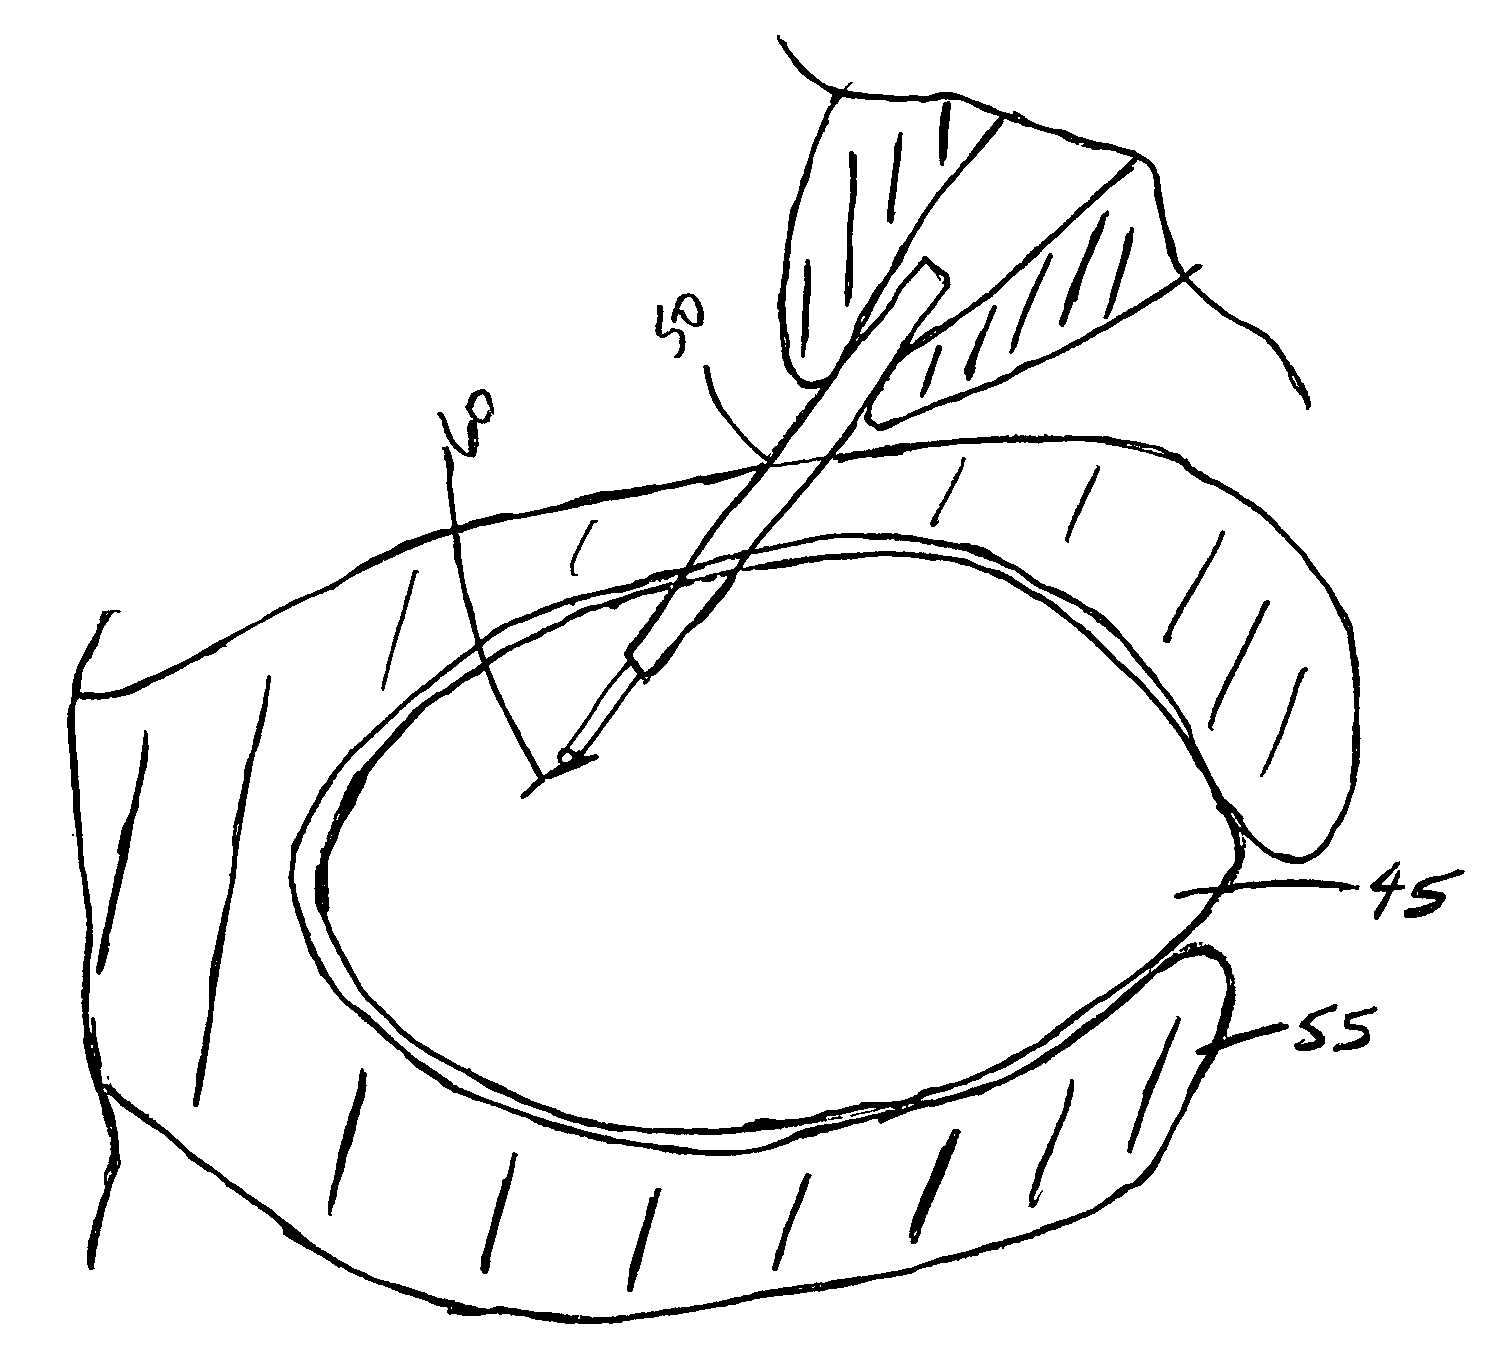 Apparatus for practicing ophthalmologic surgical techniques